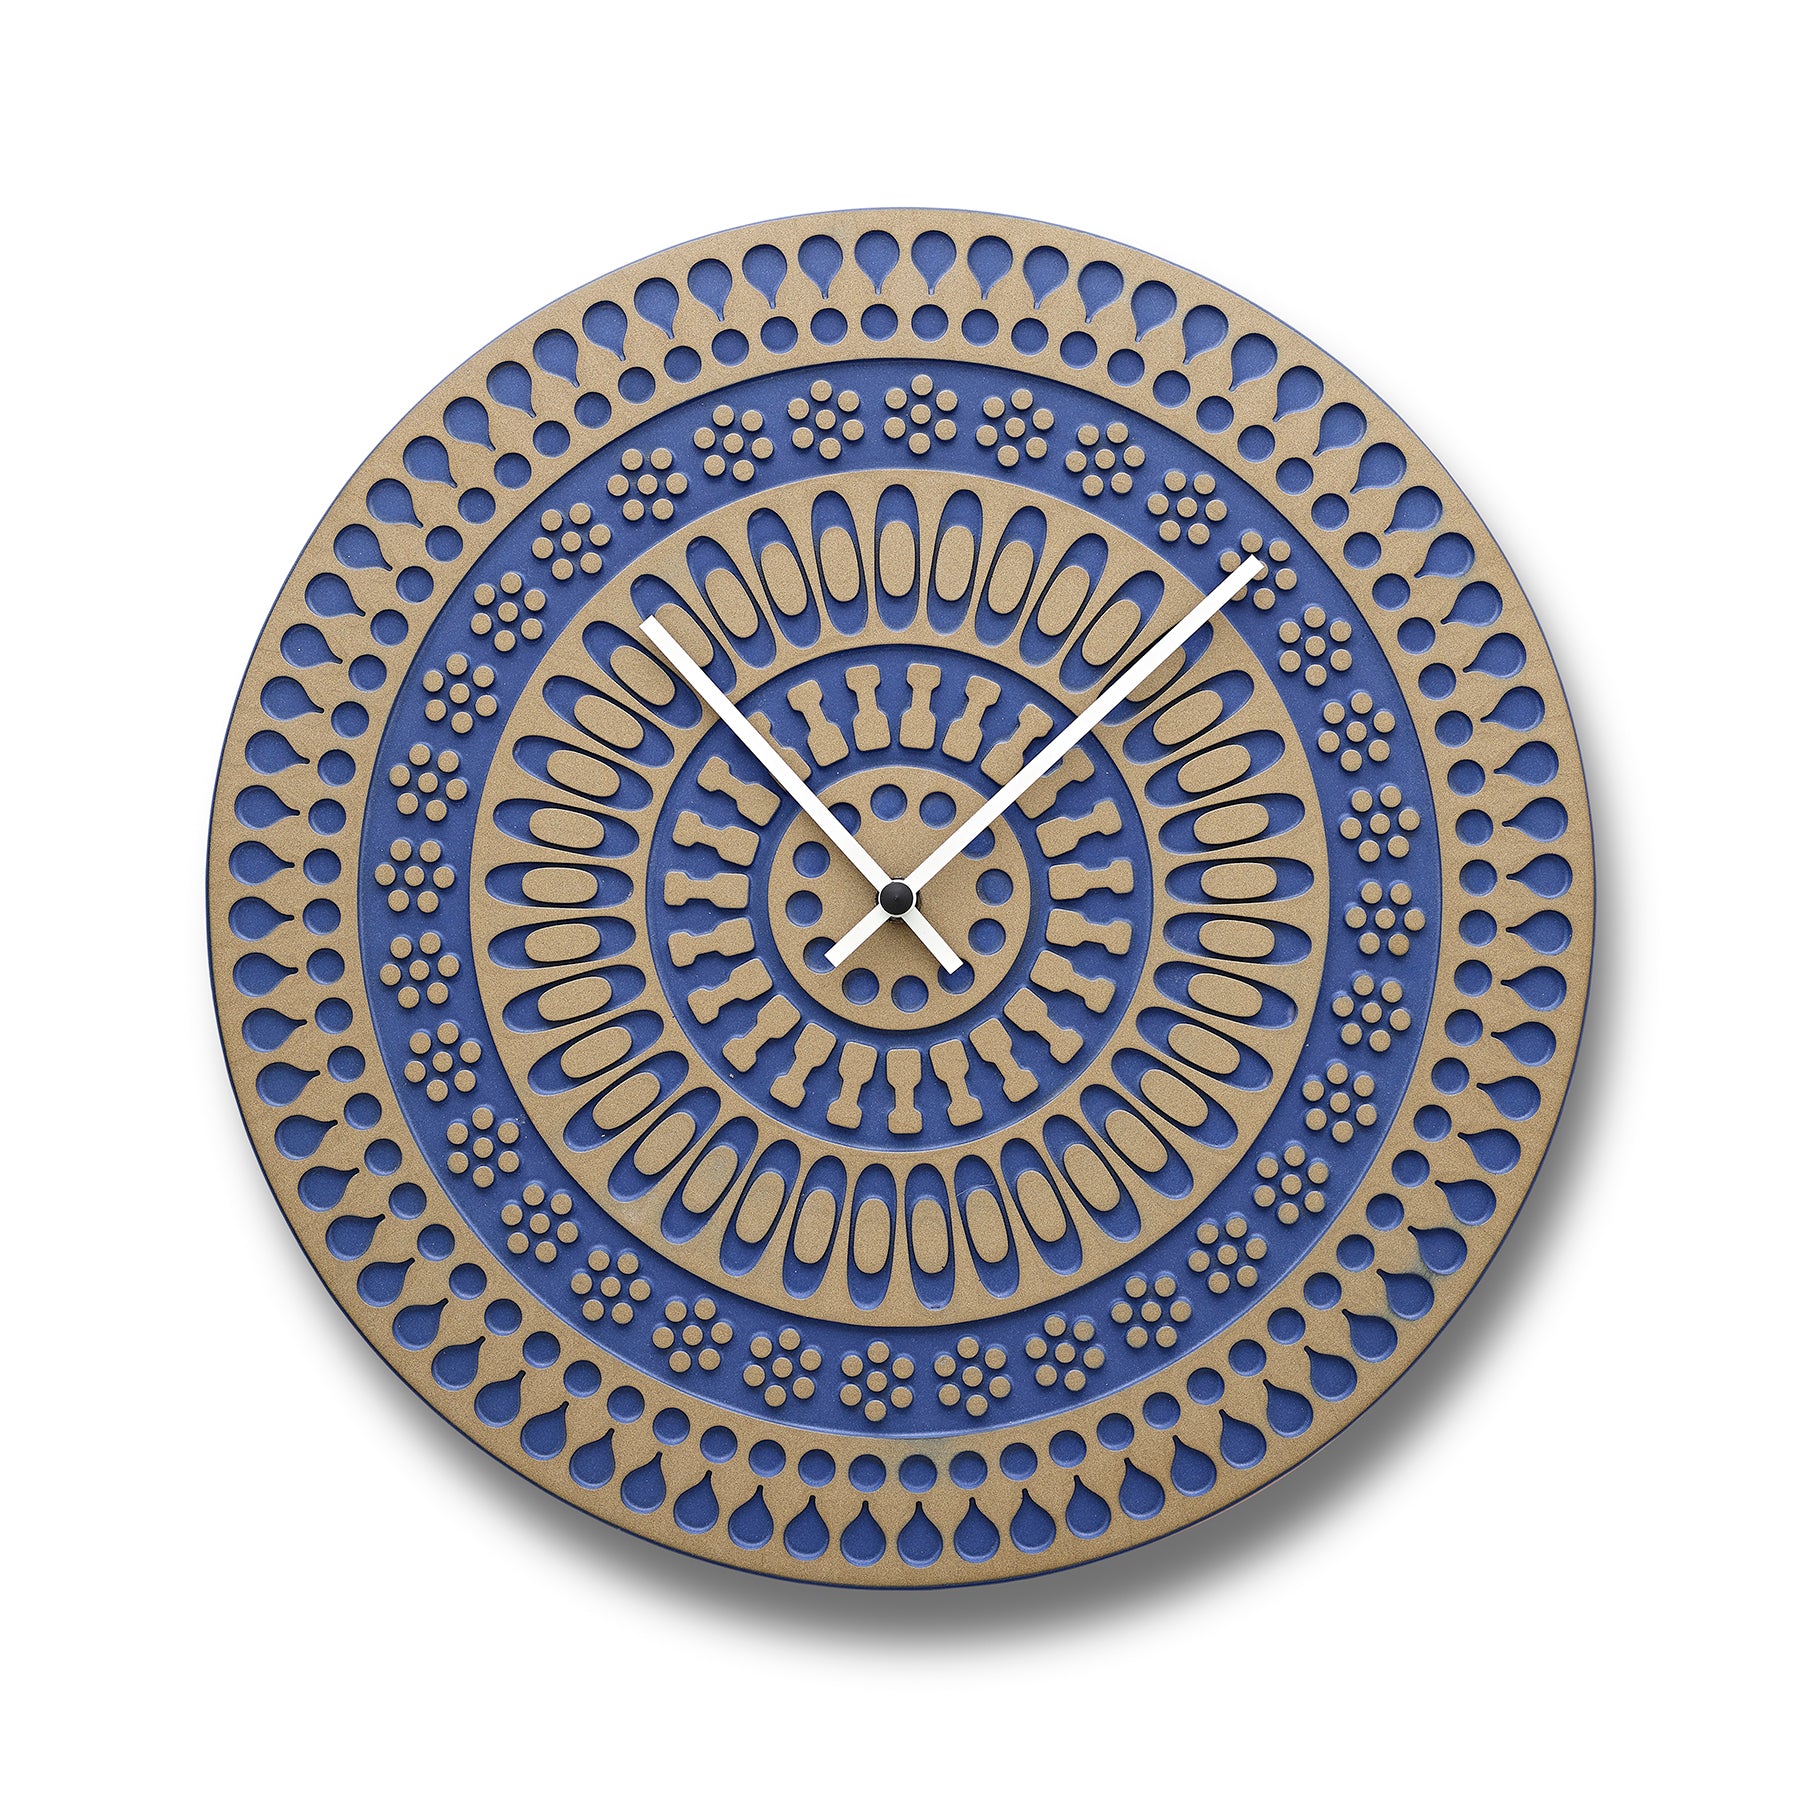 Ornament Clock in Deep Blue Zoom Image 1